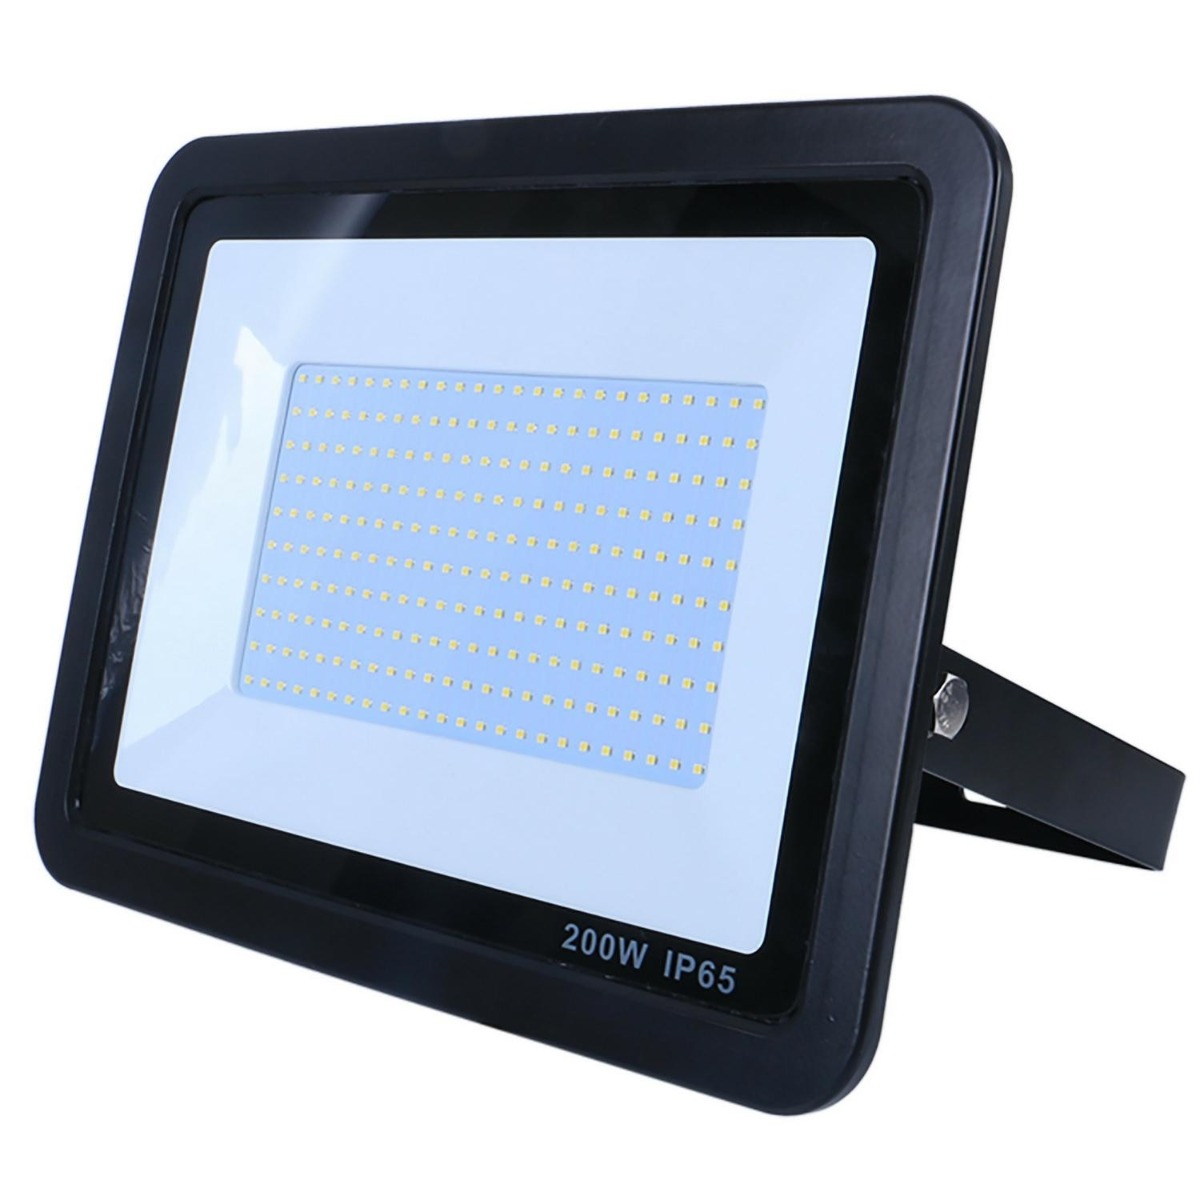 View 200w LED Floodlight In Black With Photocell Sensor Cool White information